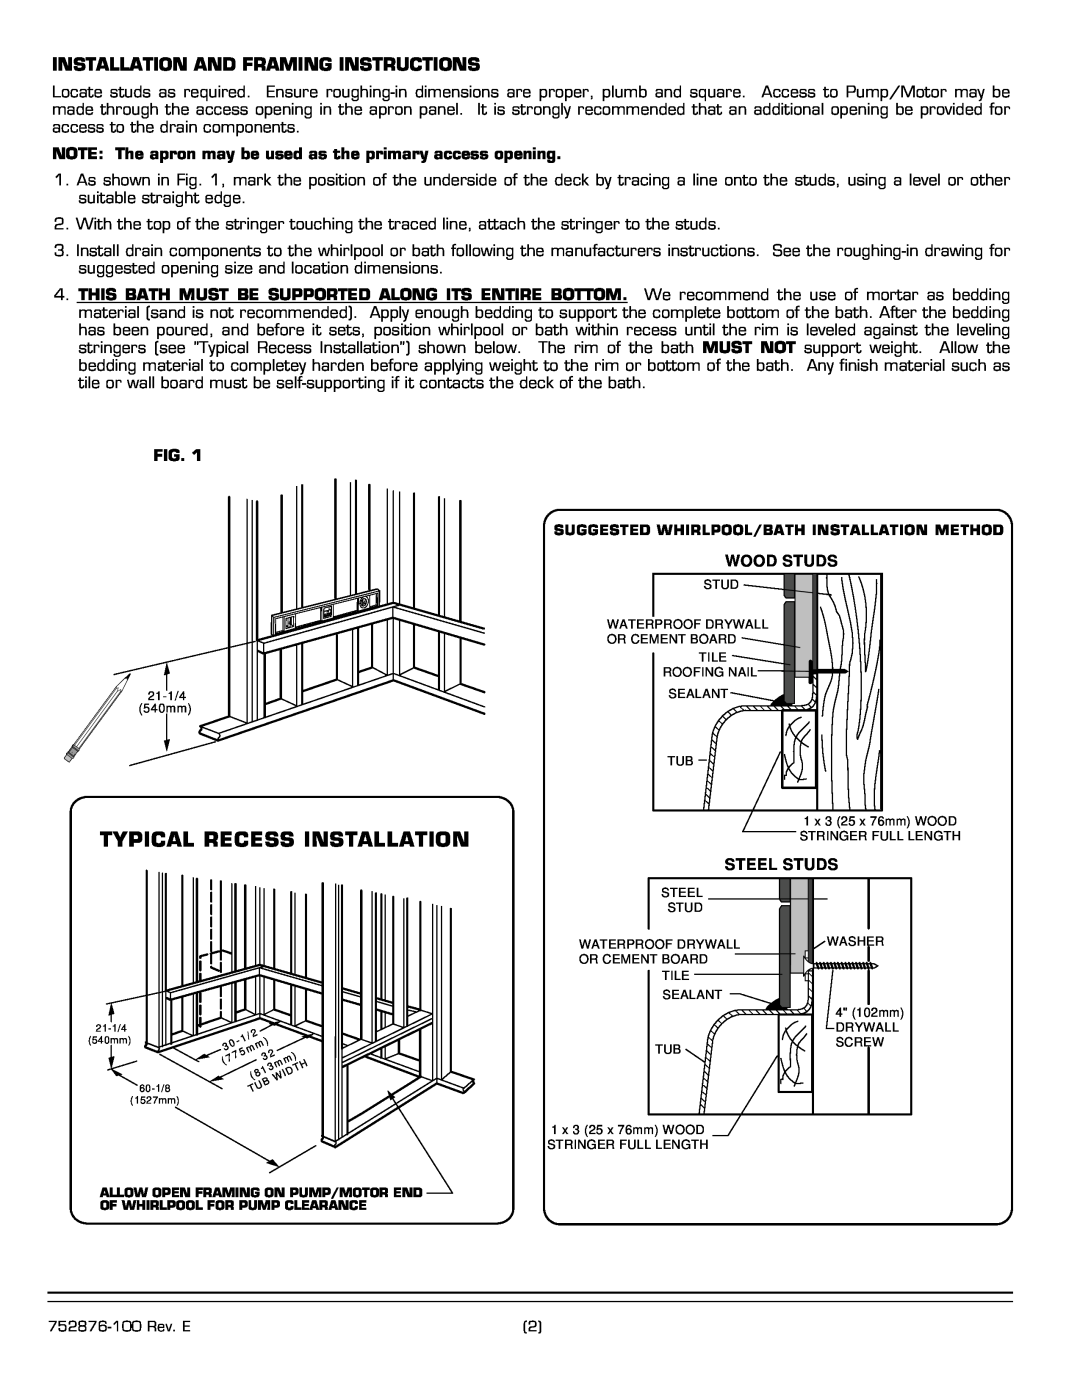 American Standard 2425E-LHO Installation And Framing Instructions, Wood Studs, Steel Studs, Typical Recess Installation 